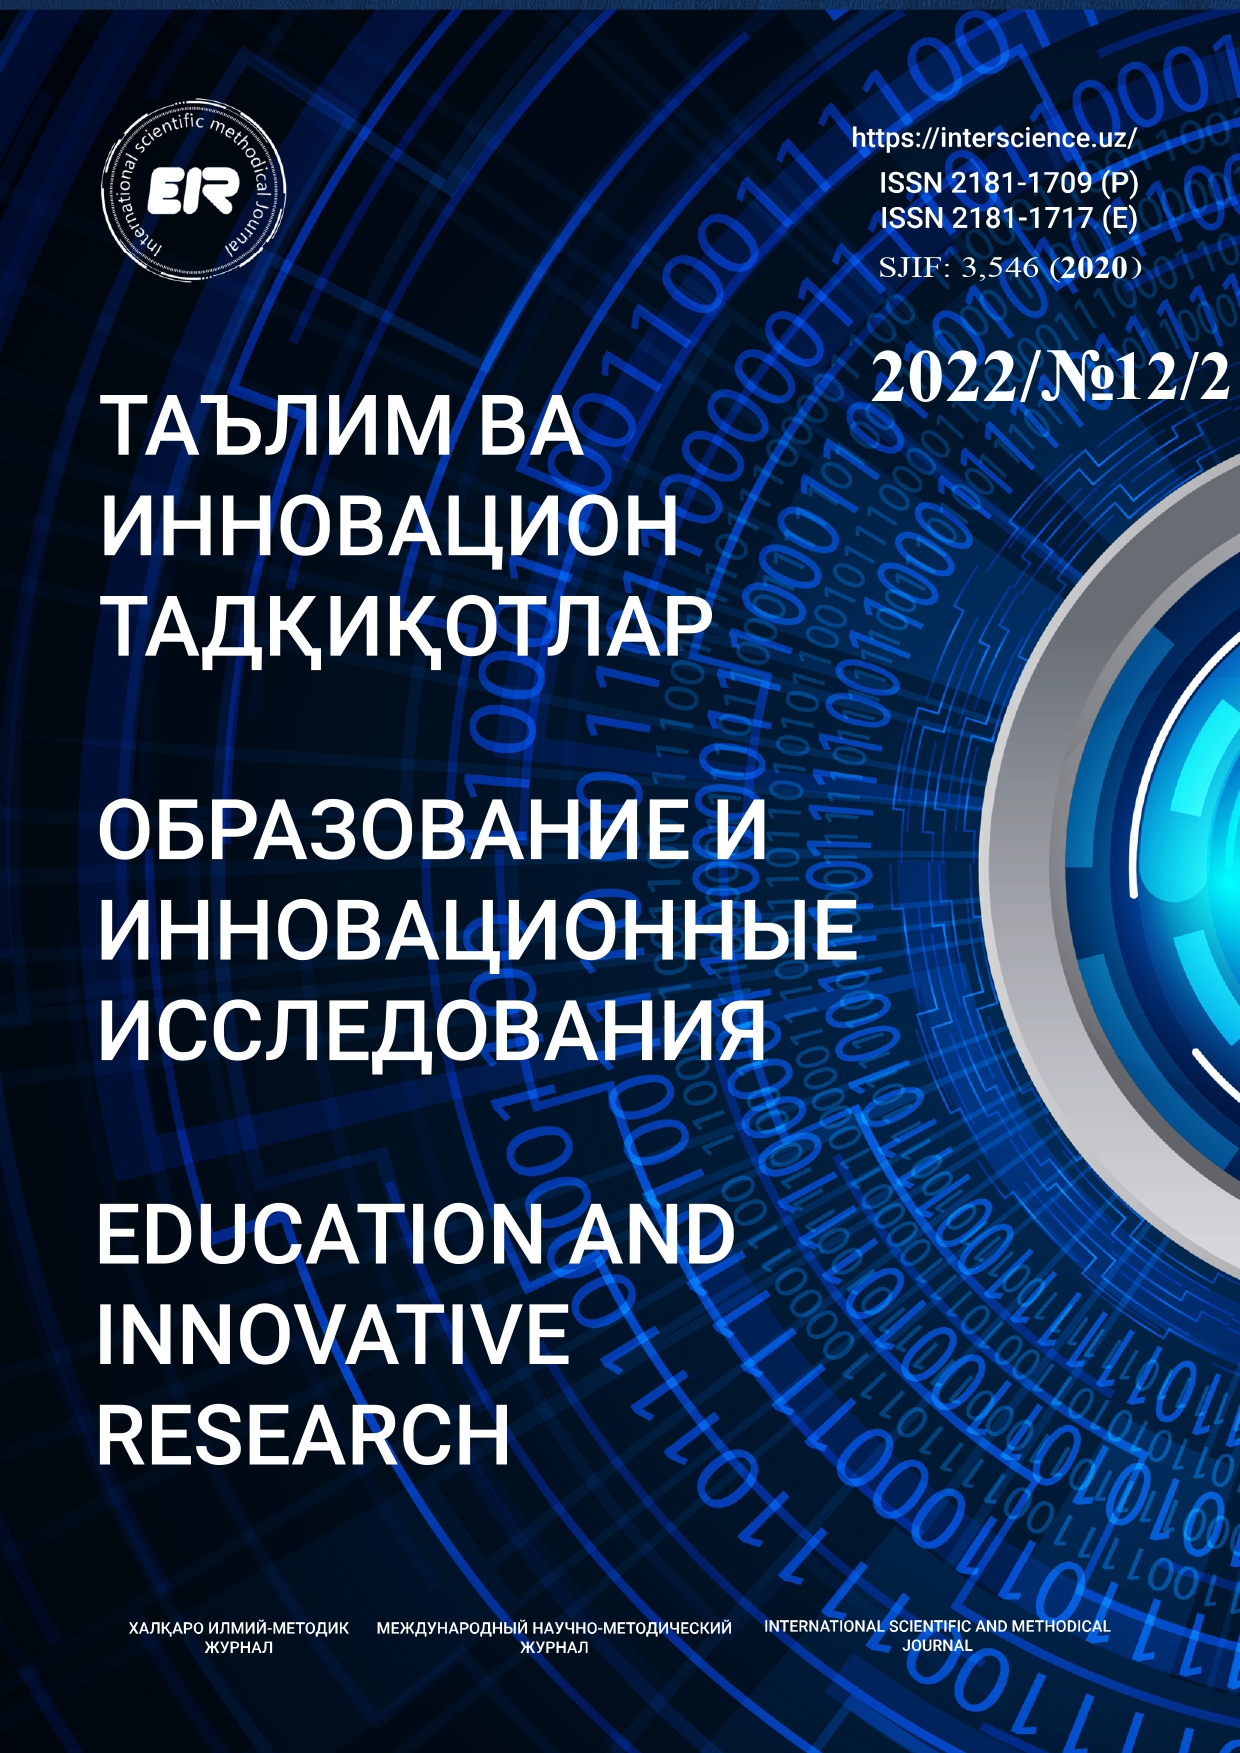 					View No. 12/2 (2022): Education and innovative research
				